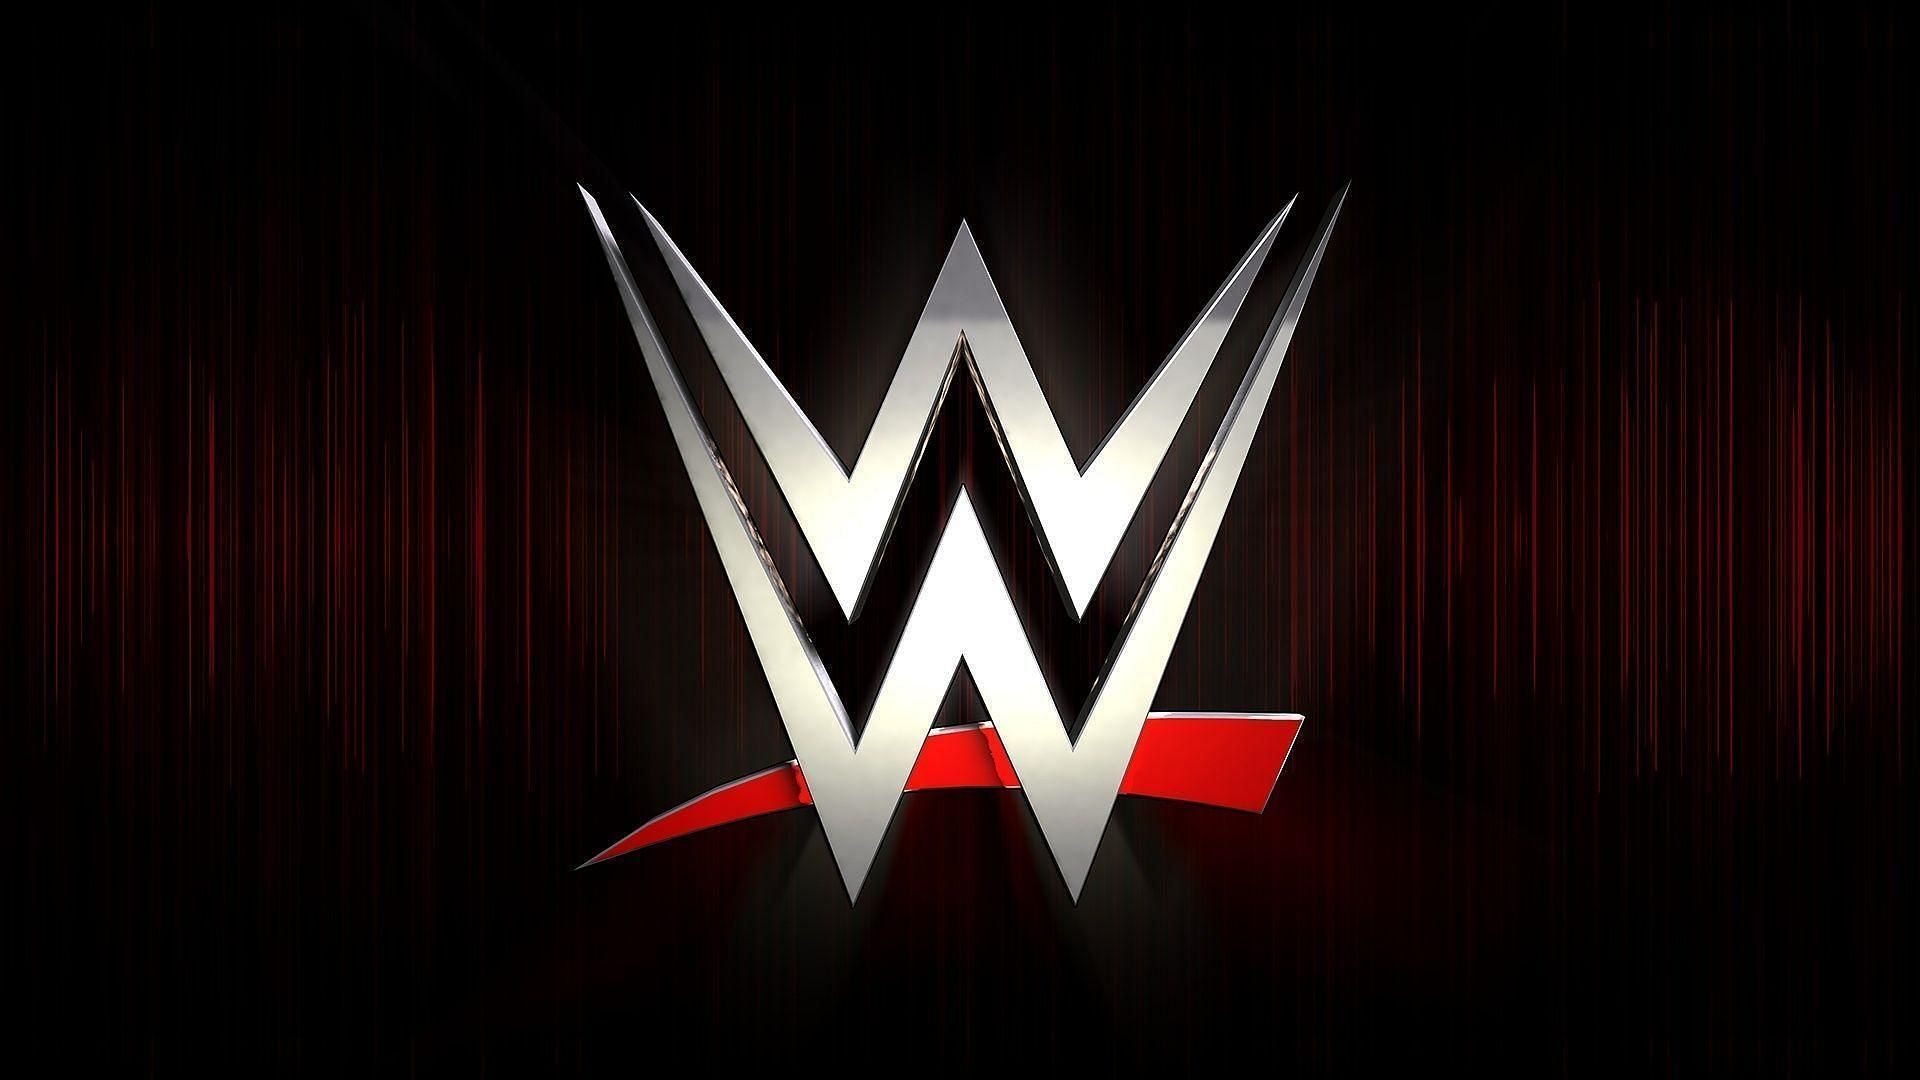 WWE recently merged with Endeavor to create a new sports entertainment company